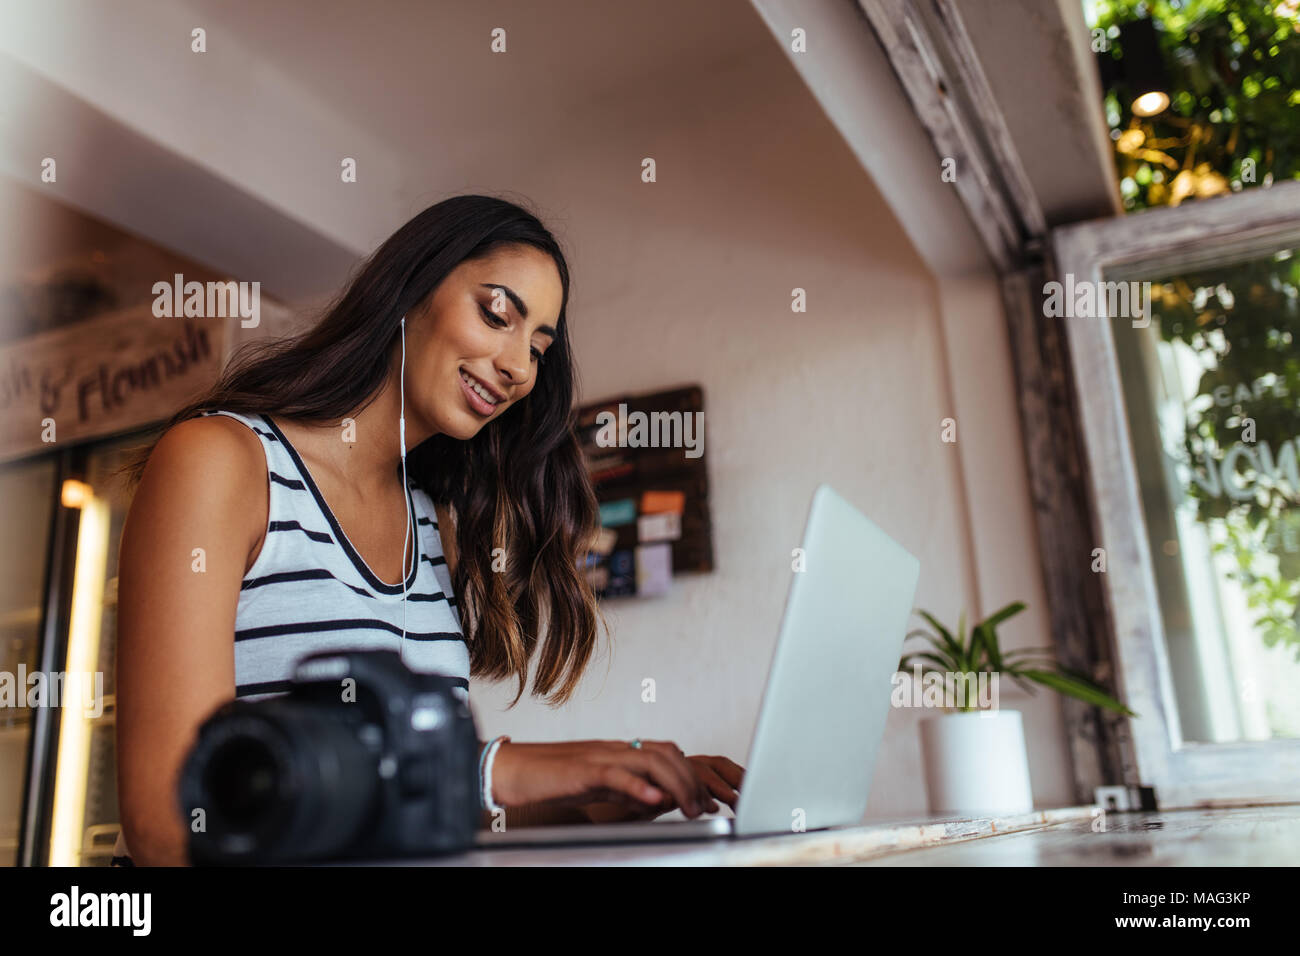 Woman blogger using laptop at home wearing earphones. Woman sitting with a professional camera on the table working on her laptop computer. Stock Photo